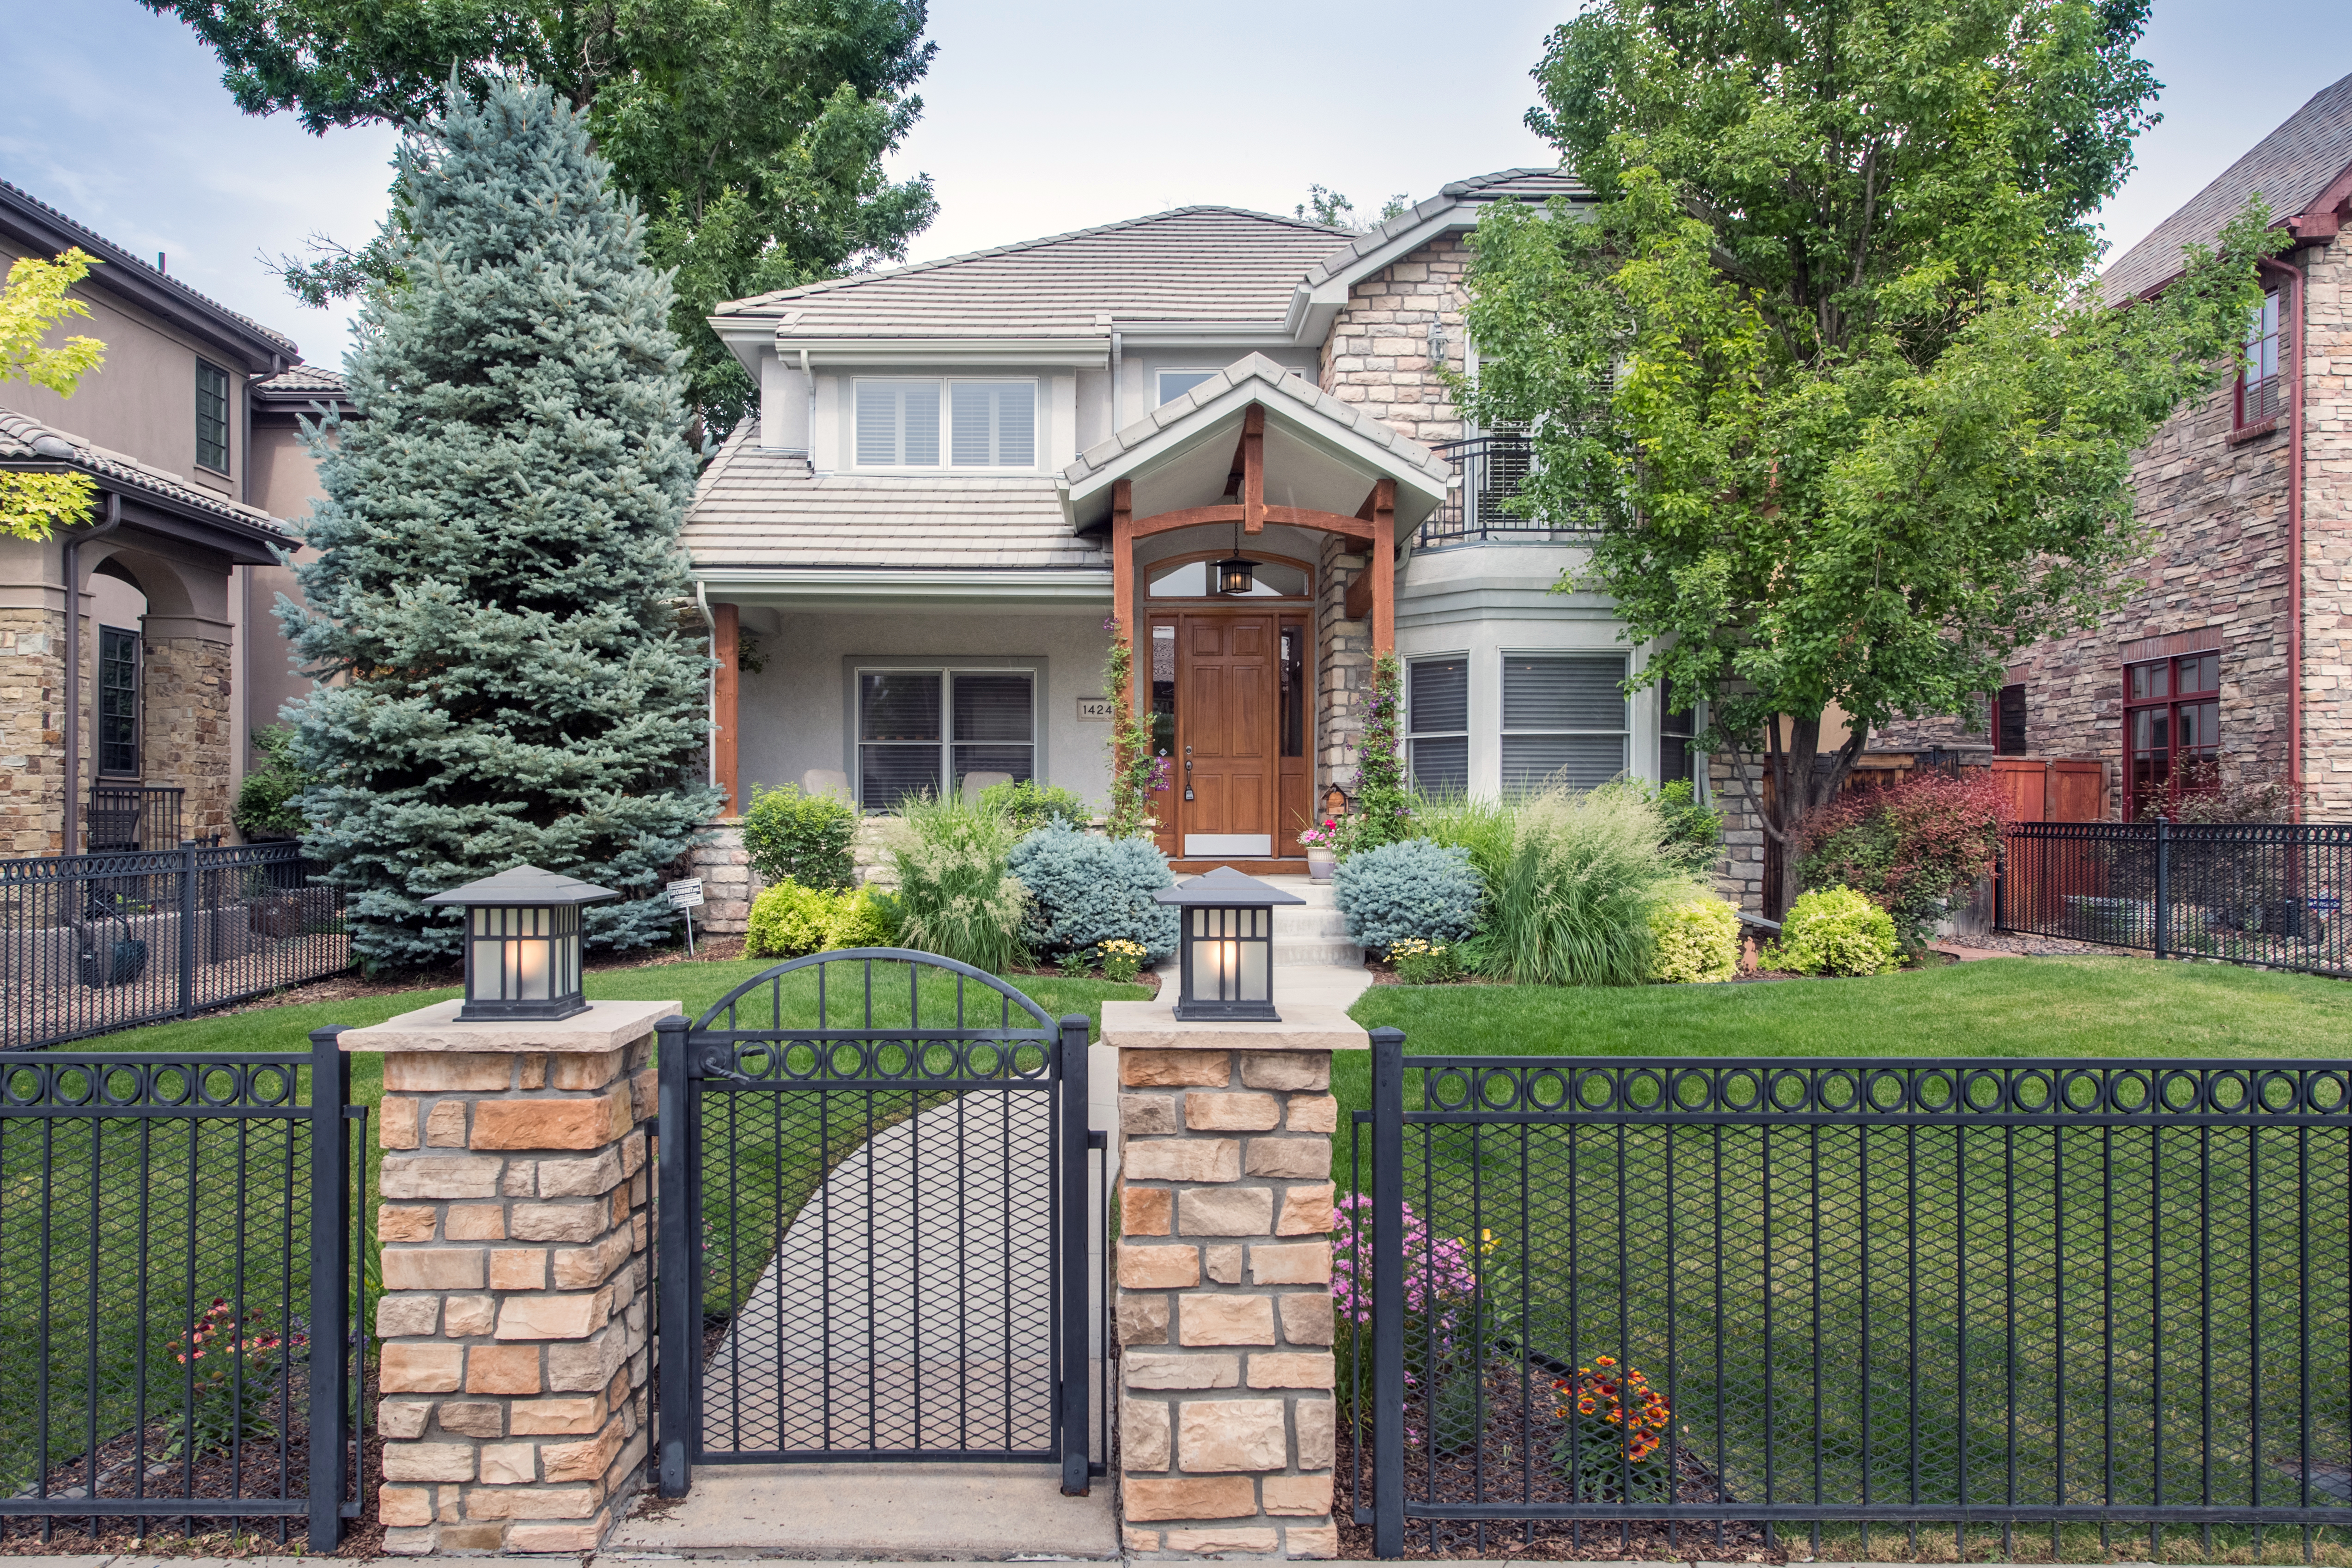 http://www.livsothebysrealty.com/eng/sales/detail/491-l-811-v2z5qx/traditional-two-story-home-on-established-pretty-block-of-cory-merrill-cory-merrill-denver-co-80210